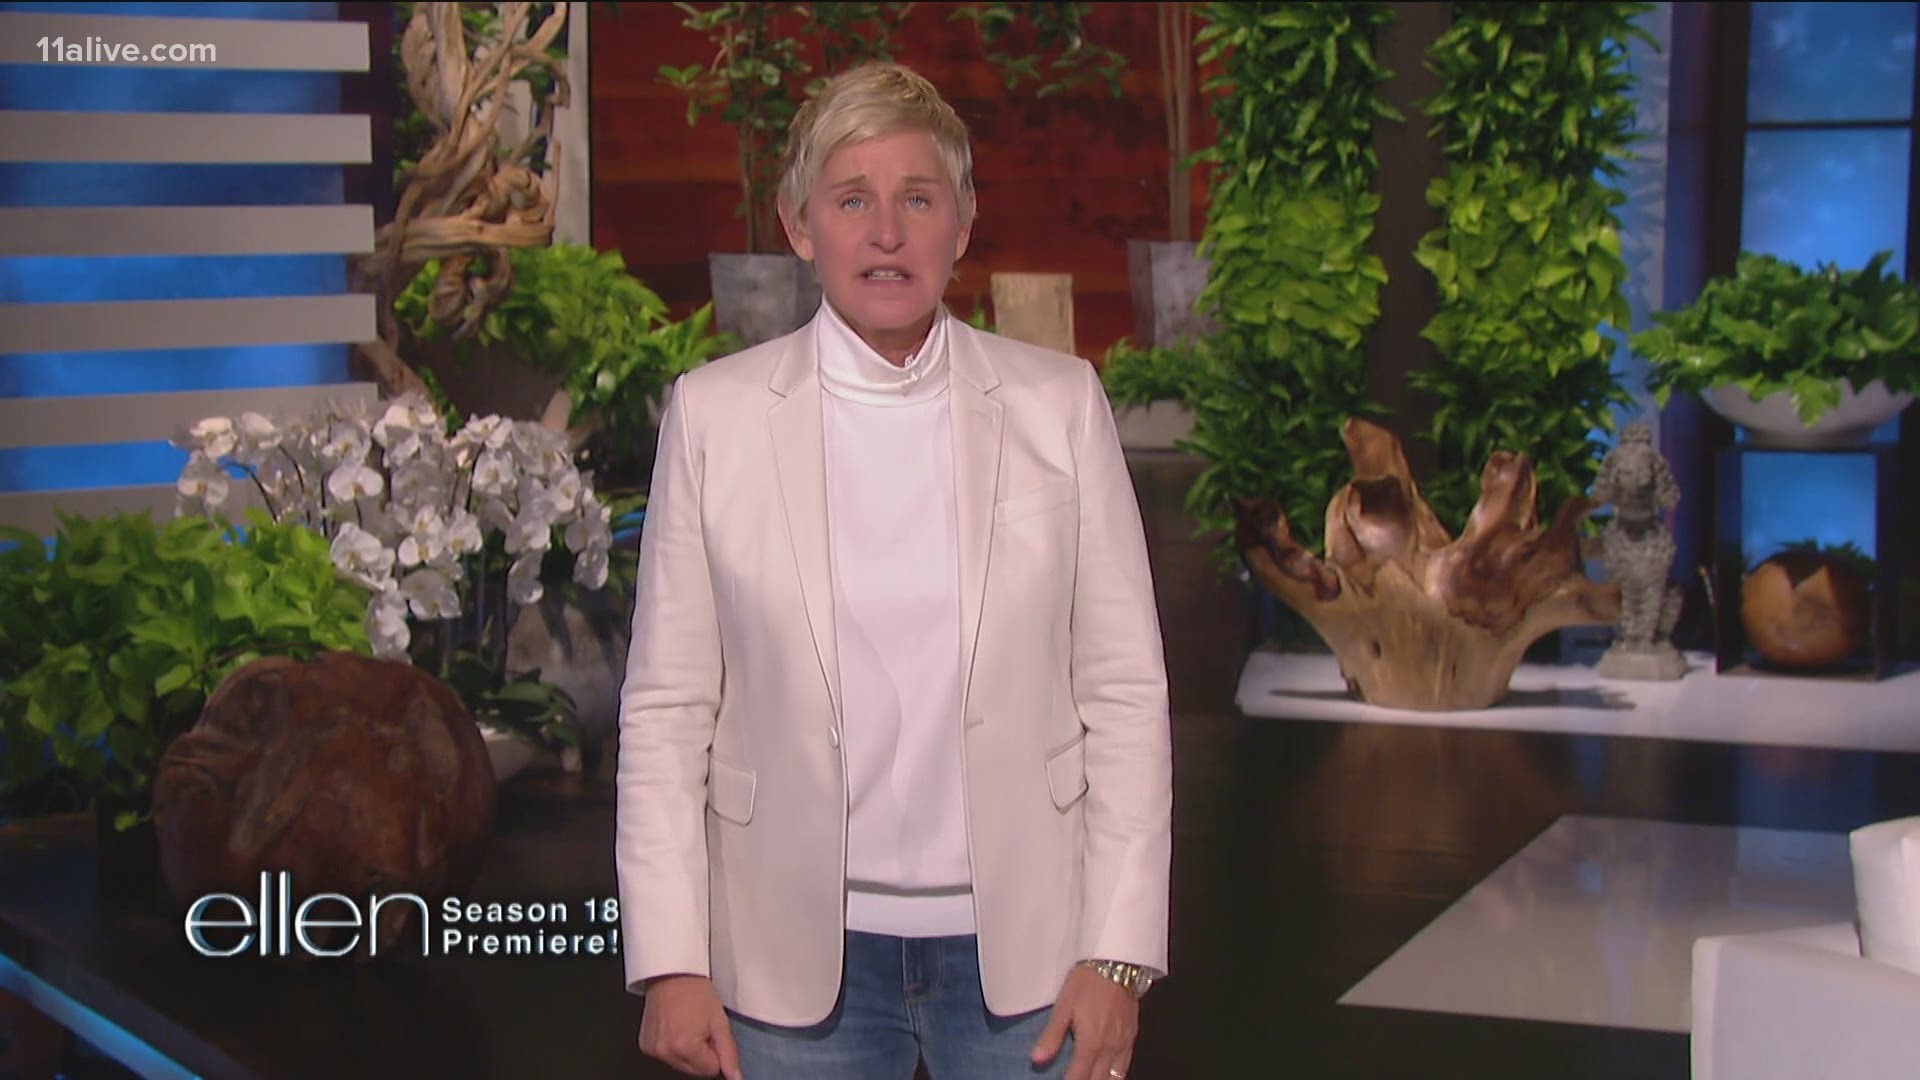 Ellen DeGeneres kicked off the 18th season of her daytime talk show by making an on-air apology and addressing allegations of a toxic work environment.